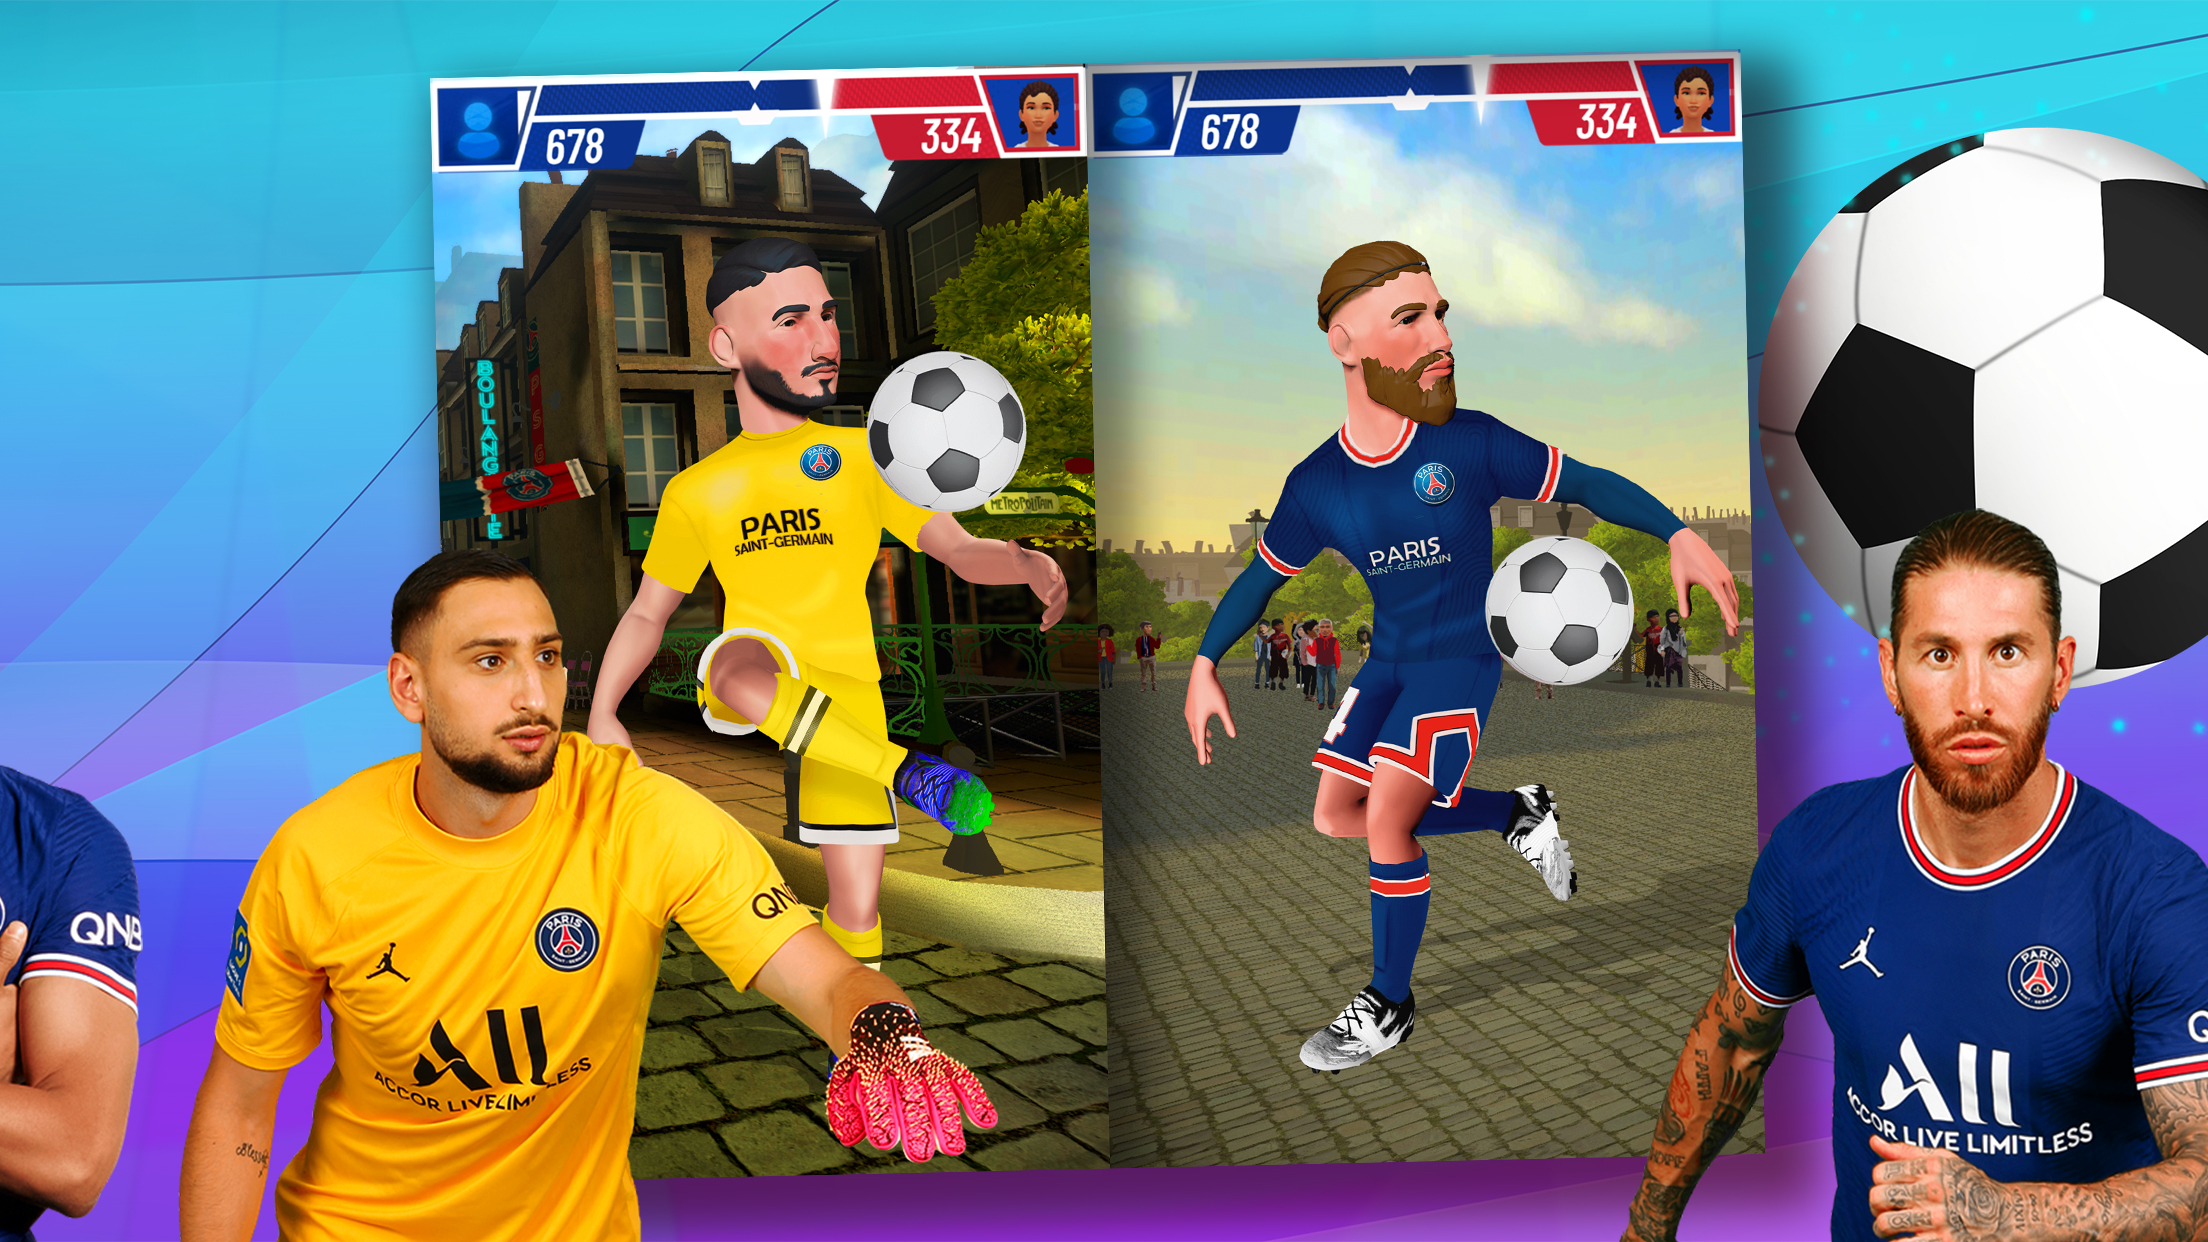 PSG Soccer Freestyle 2022 APK 1.0.201982 for Android – Download PSG Soccer  Freestyle 2022 APK Latest Version from APKFab.com